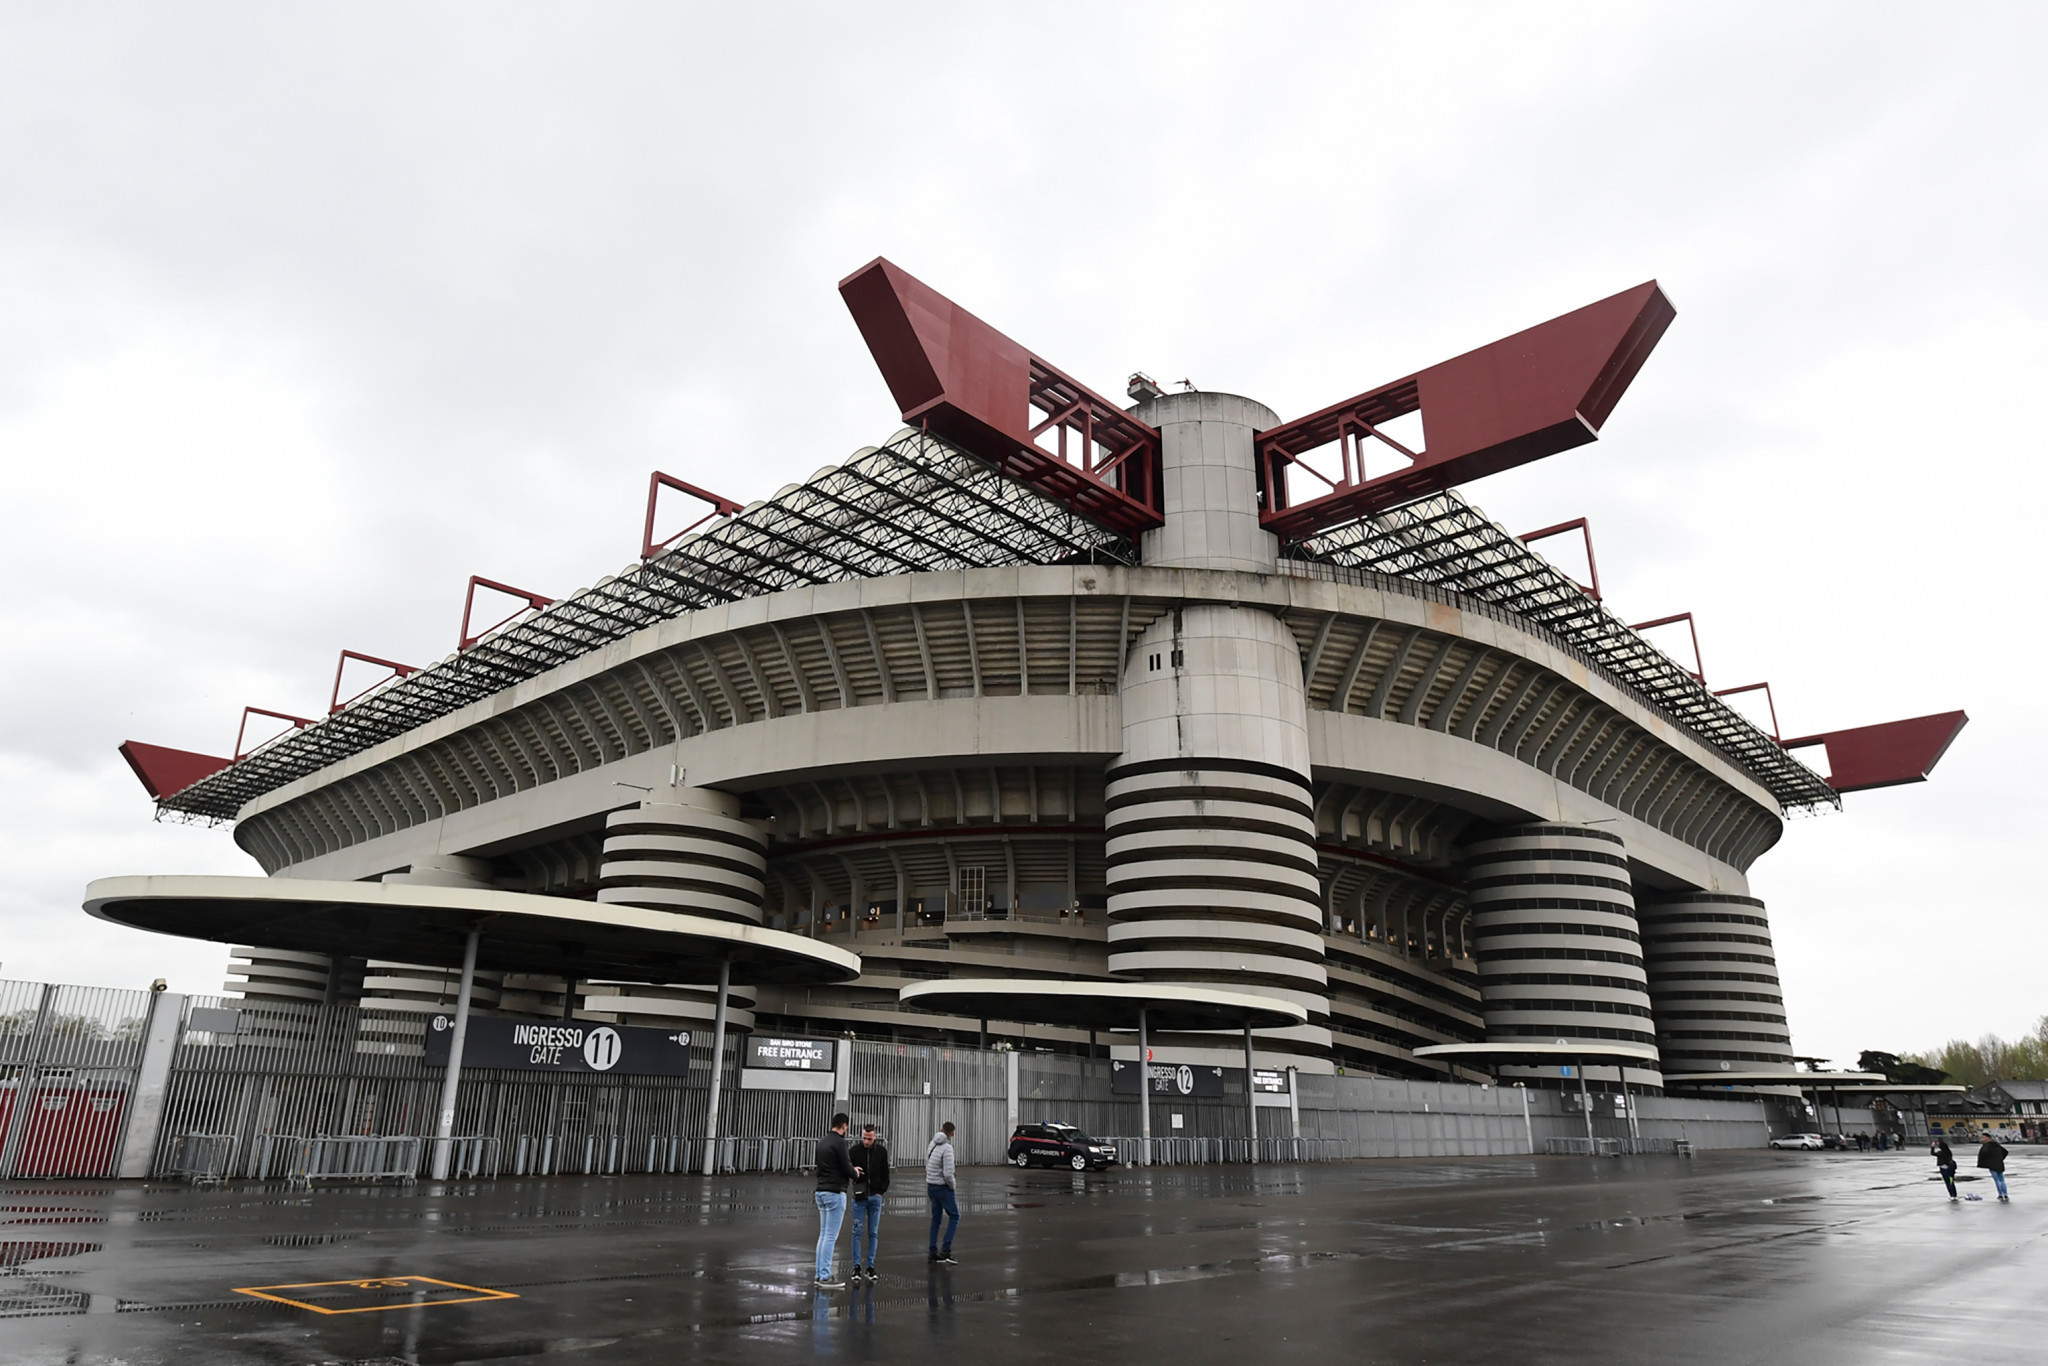 Even in the rain, San Siro was an impressive sight for the IOC Evaluation Commission ©Getty Images